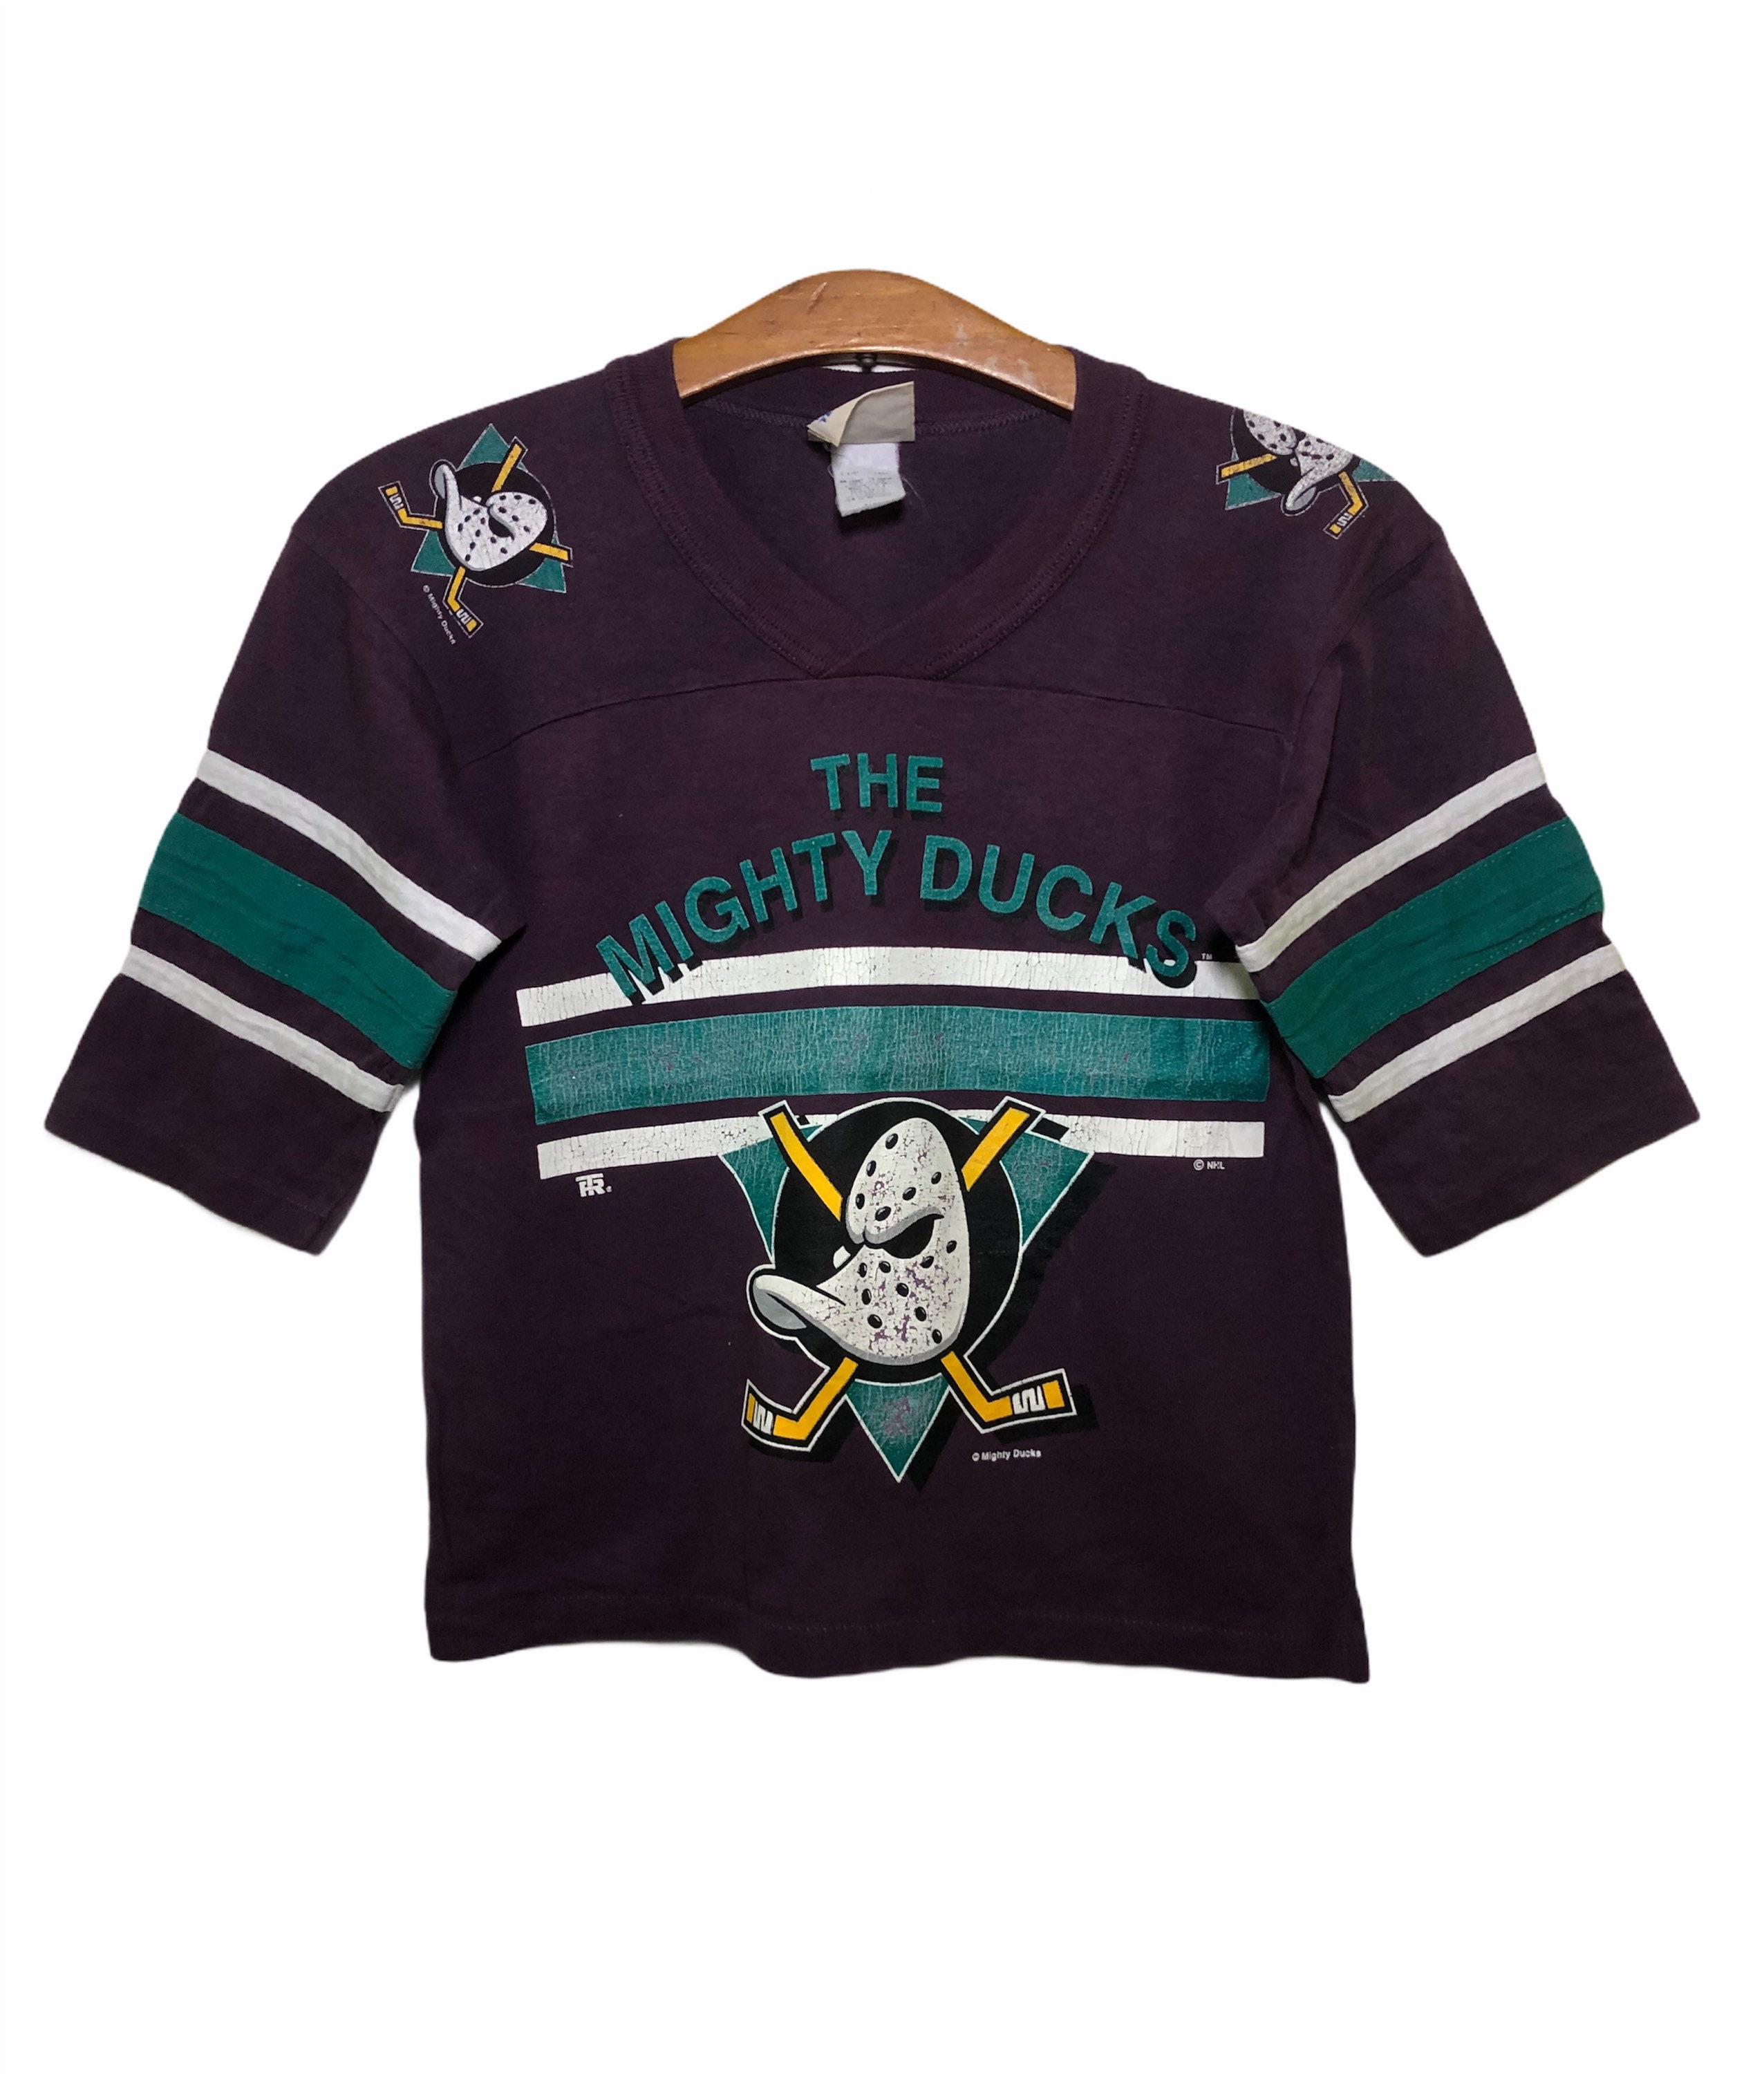 vintage ANAHEIM MiGHTY DUCKS SHIRT, LARGE, JERSEY-STYLE, MAJESTIC NHL 90s